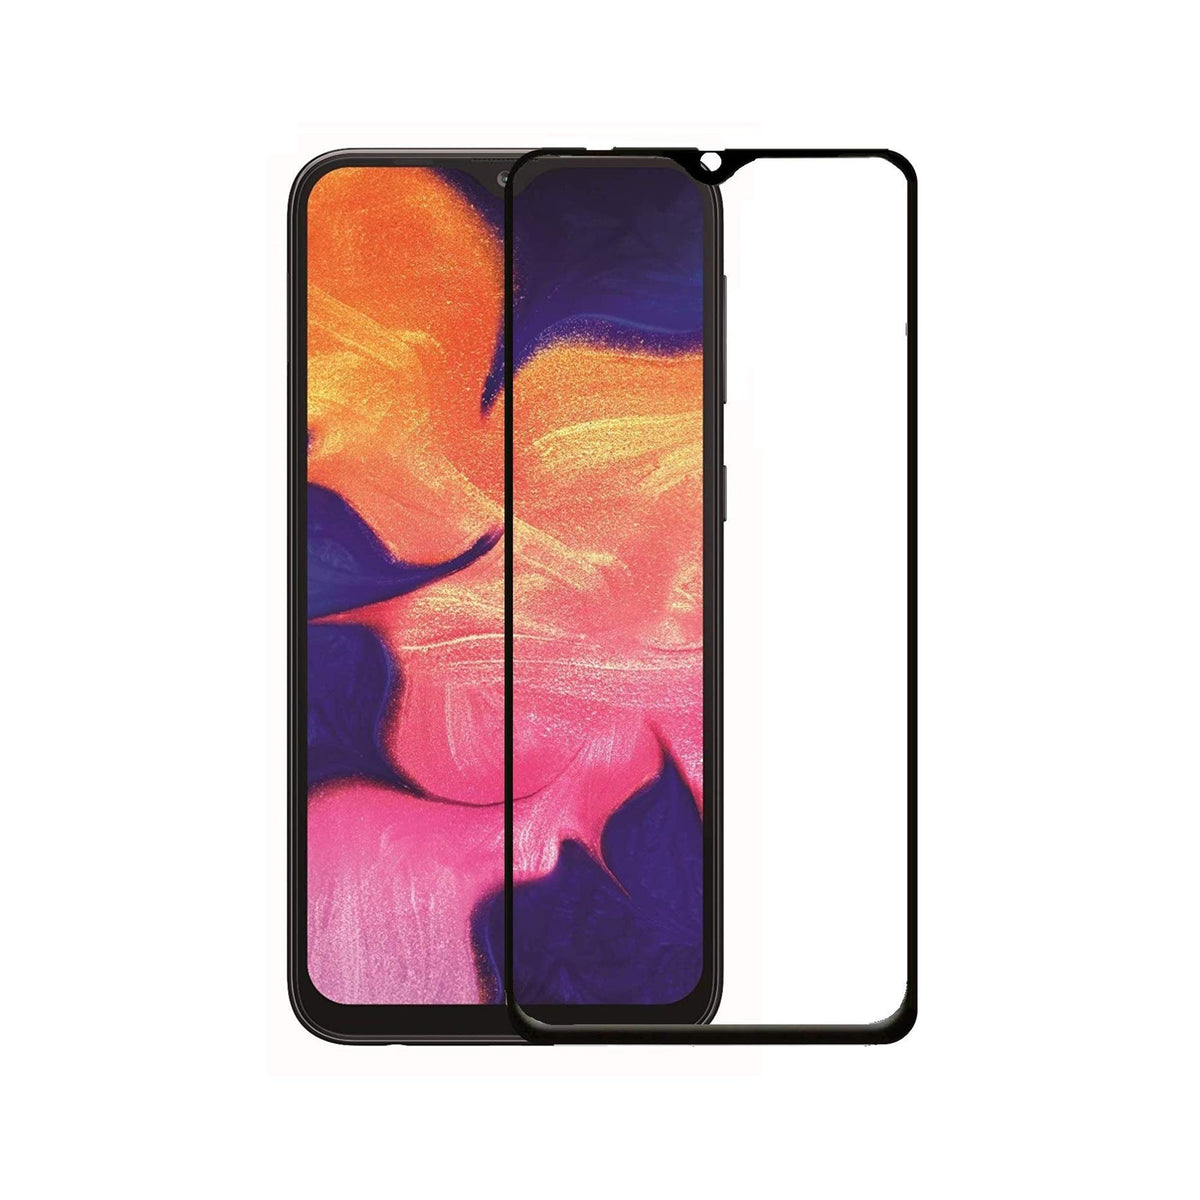 TEMPERED GLASS FOR SAMSUNG GALAXY M10